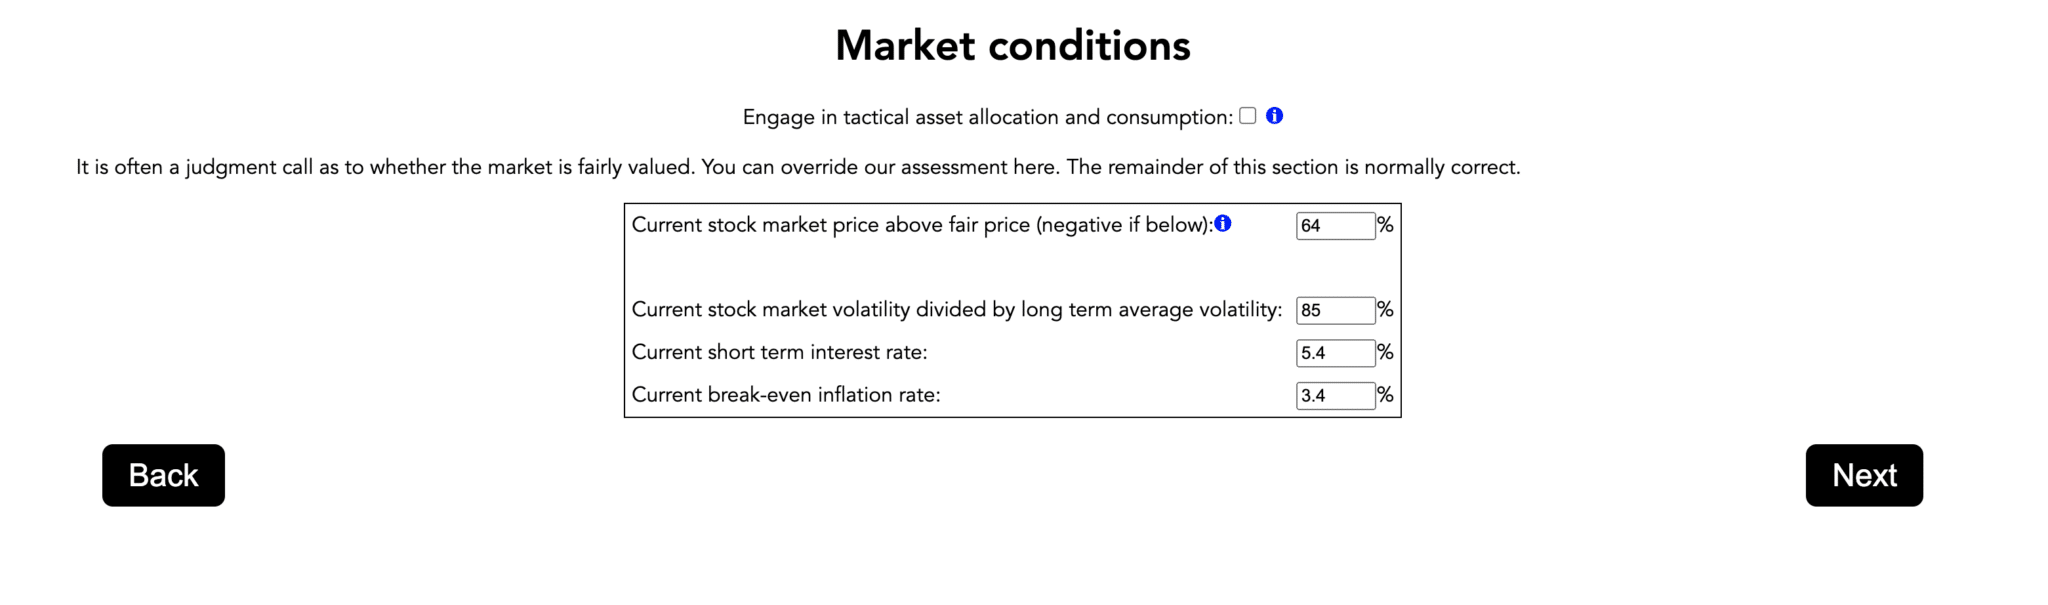 AIPlanner Market Conditions